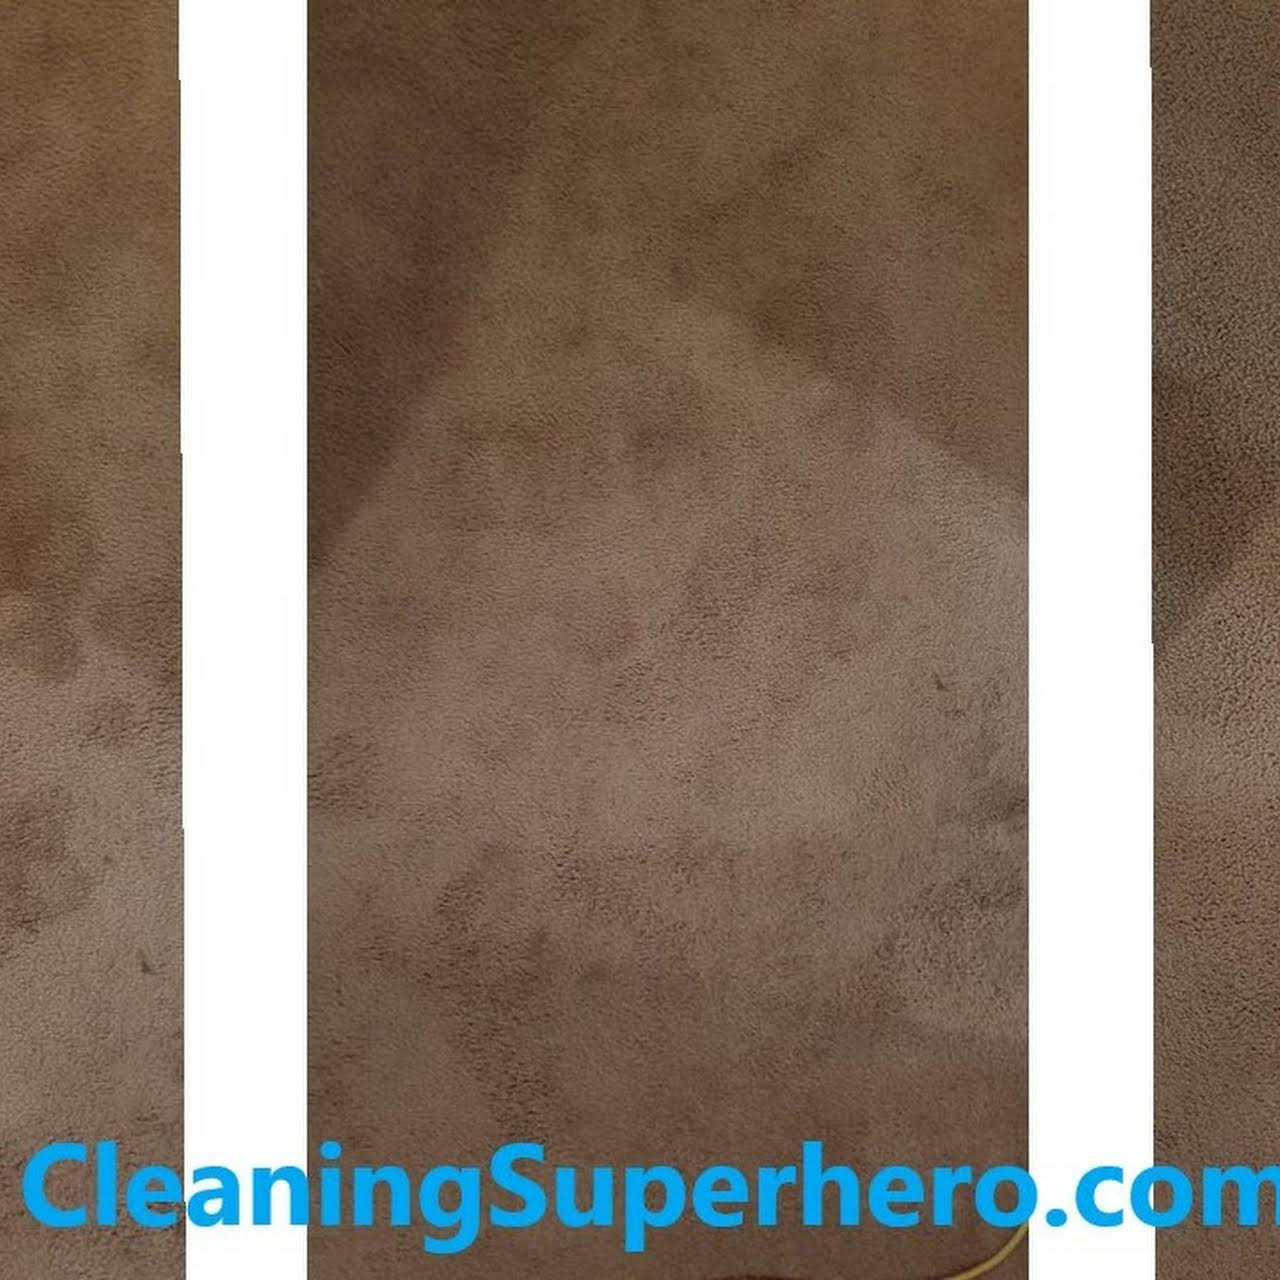 12 Fabulous Hardwood Floor Repair Birmingham Al 2024 free download hardwood floor repair birmingham al of cleaning superhero carpet and rug cleaning service in birmingham intended for pet stains and od